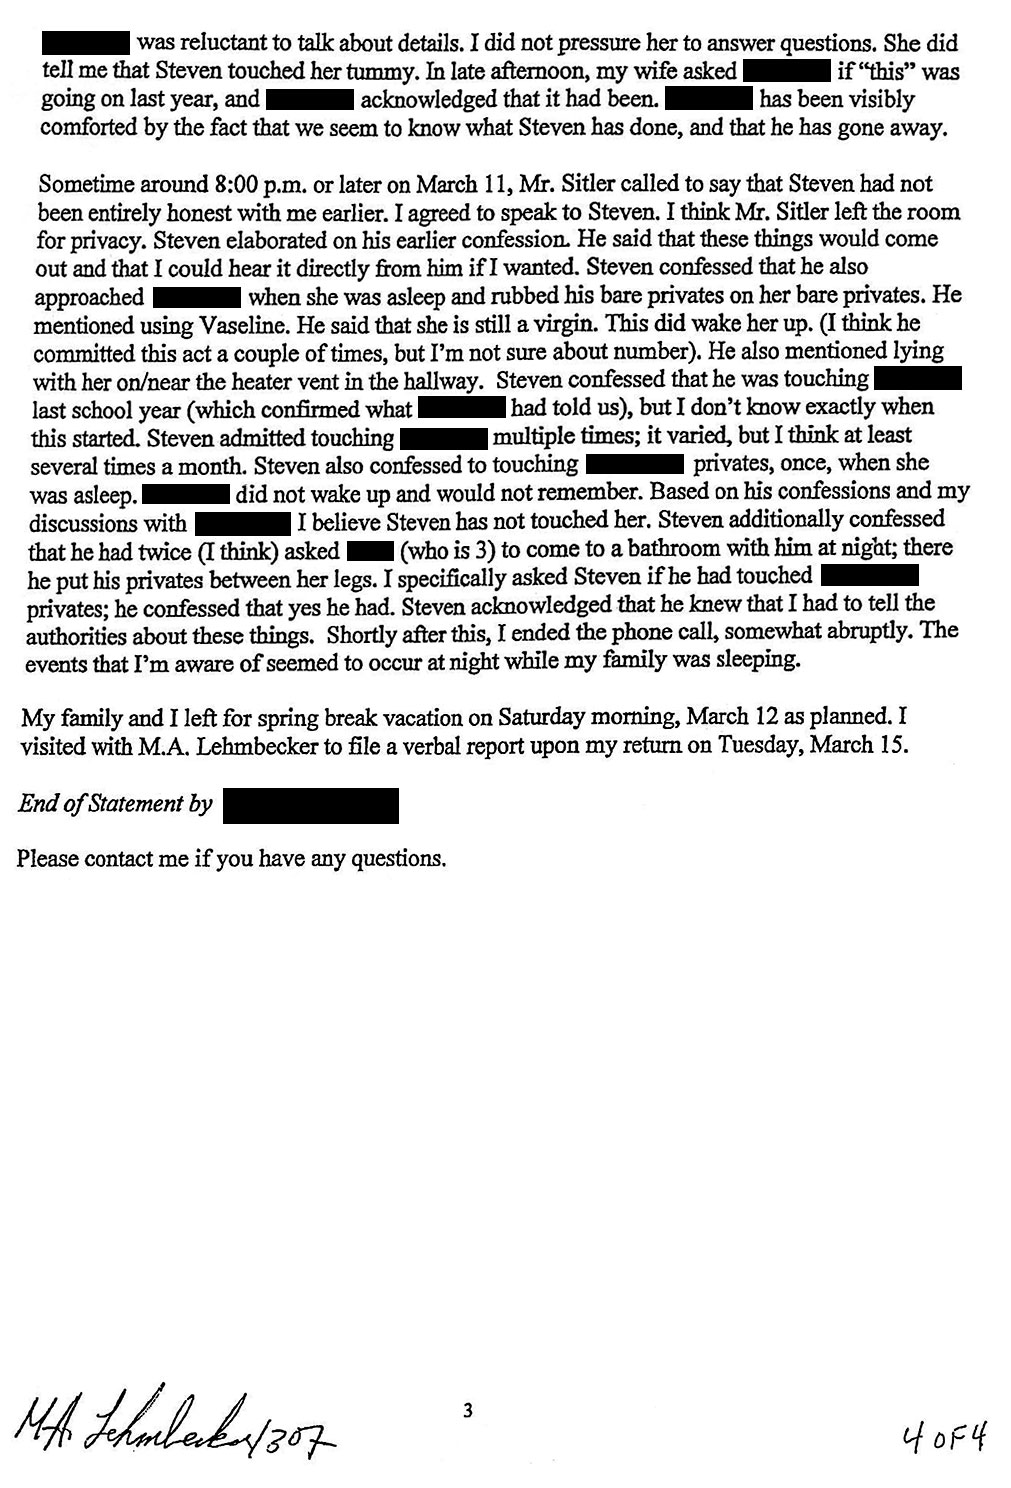 Written Statement page 4: “He mentioned using Vaseline.”